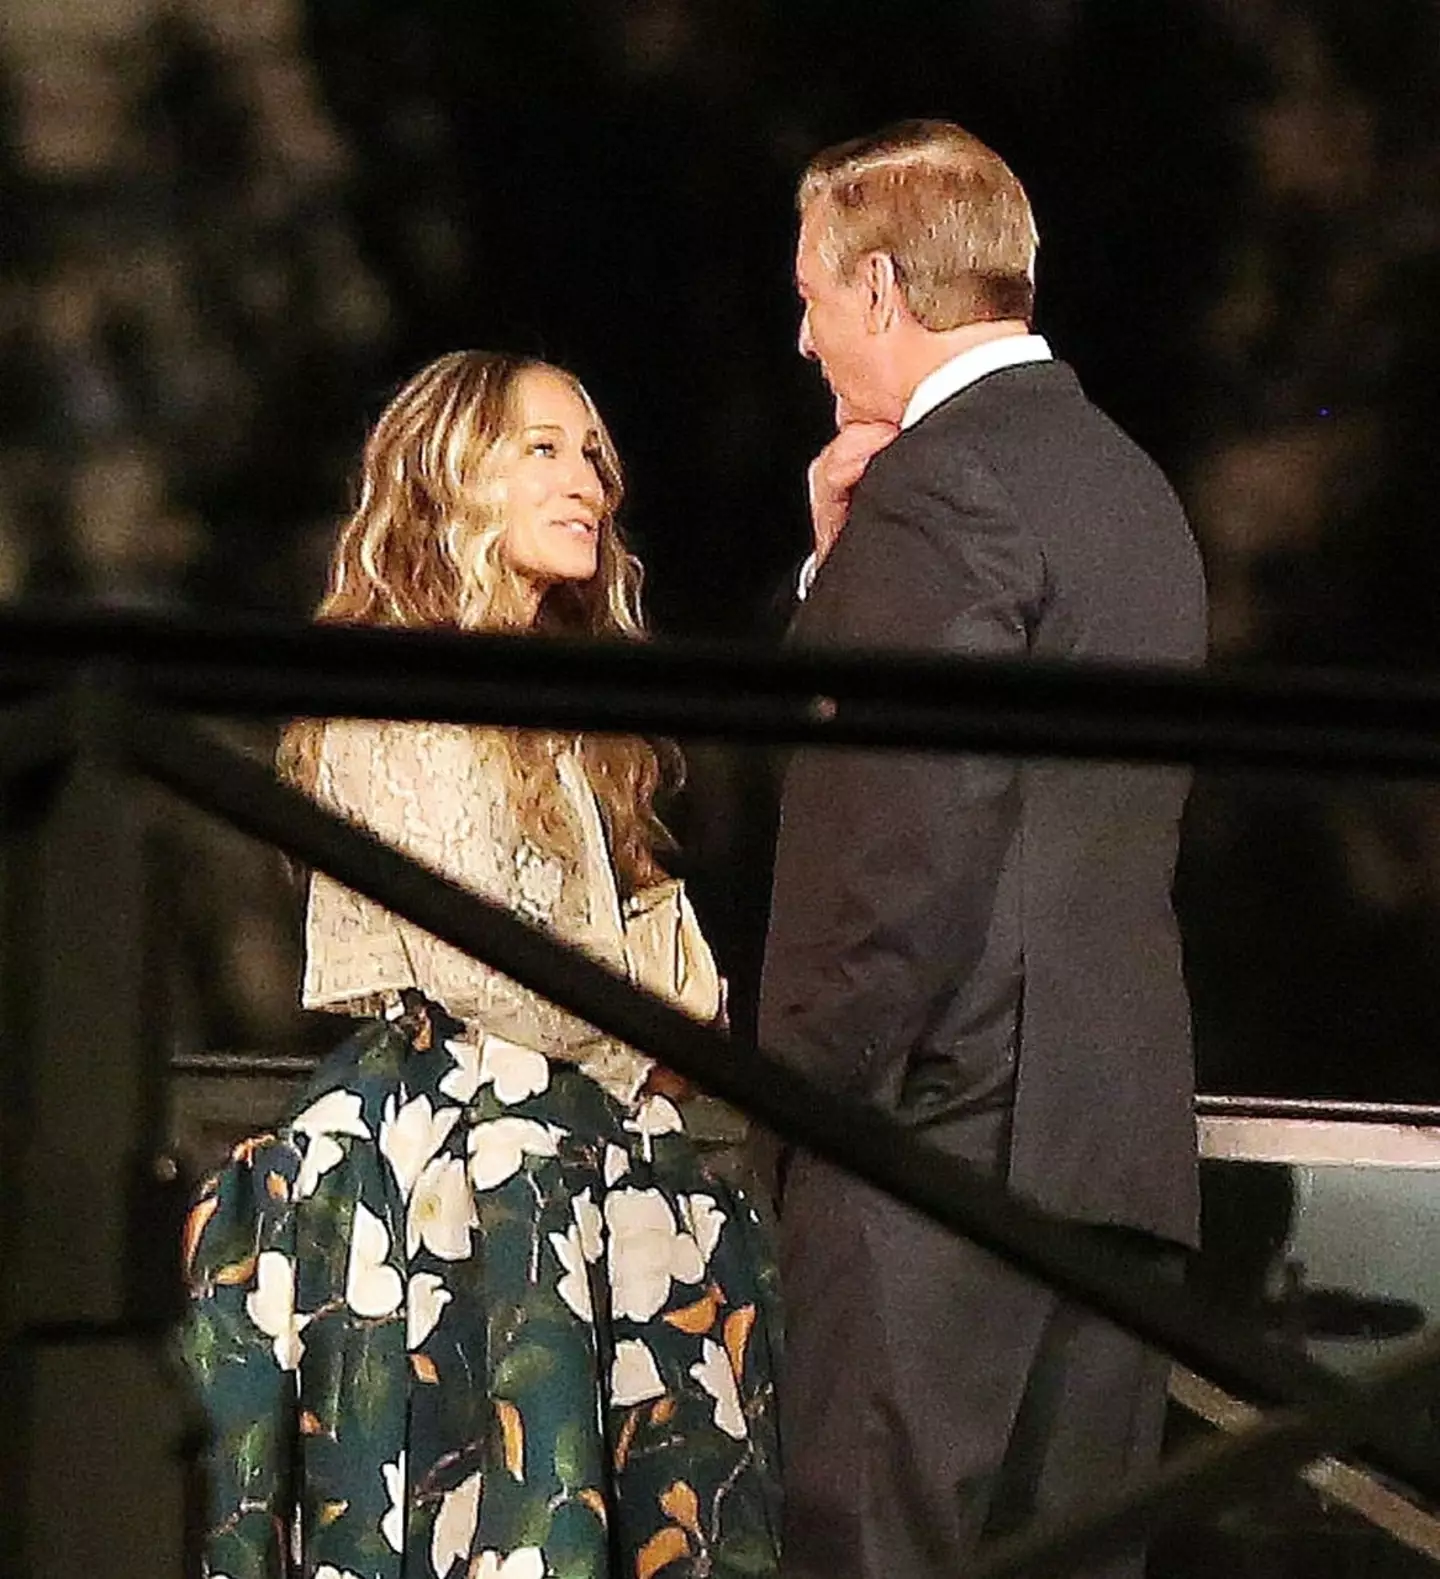 SJP and Noth were spotted filming out in Paris last year (